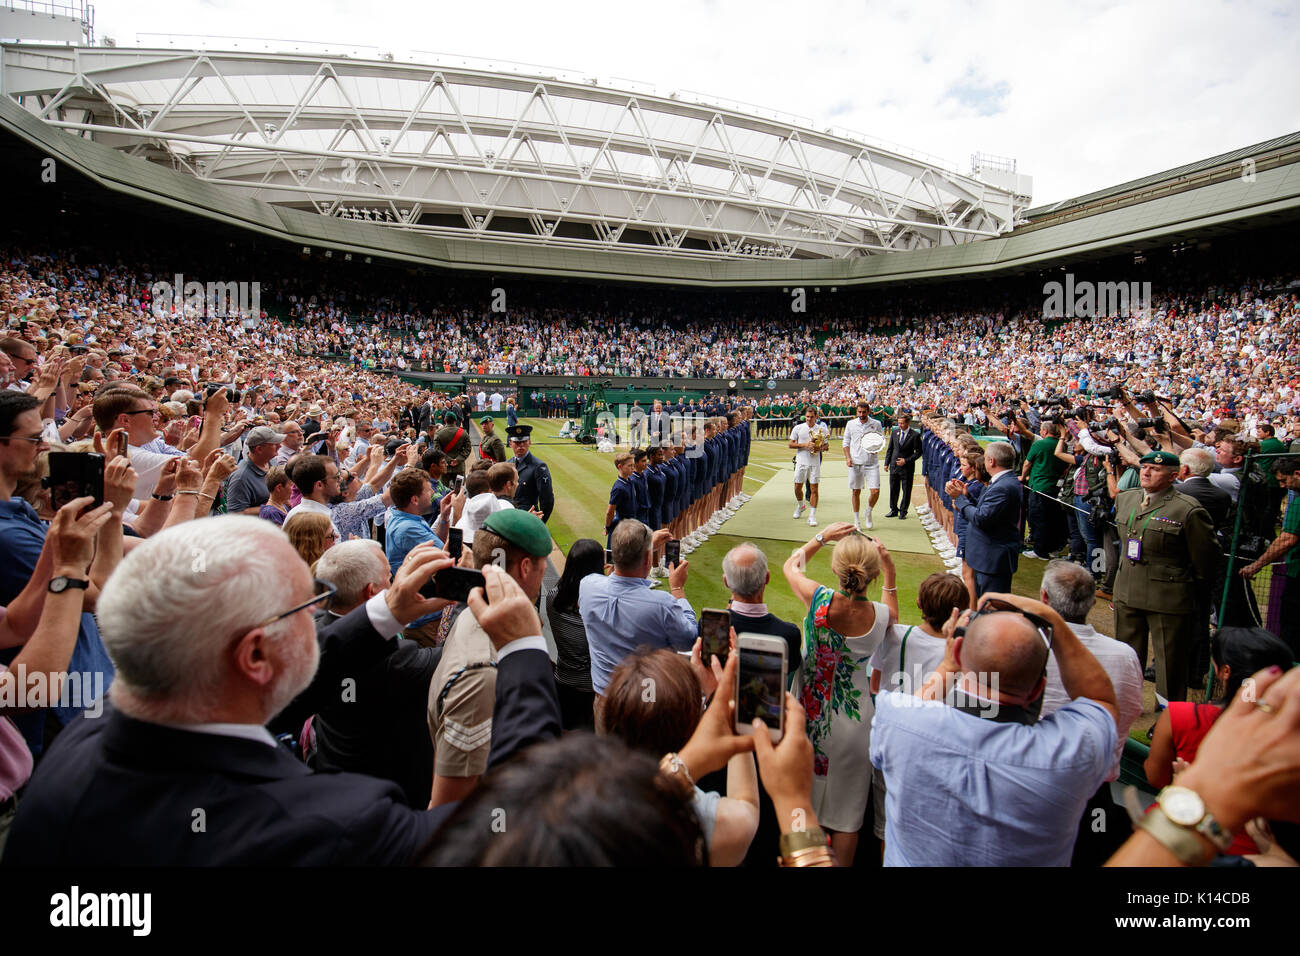 Roger Federer of Switzerland and Marin Cilic of Croatia walk off Centre Court with their trophies at the Gentlemen's Singles - Wimbledon Championships Stock Photo